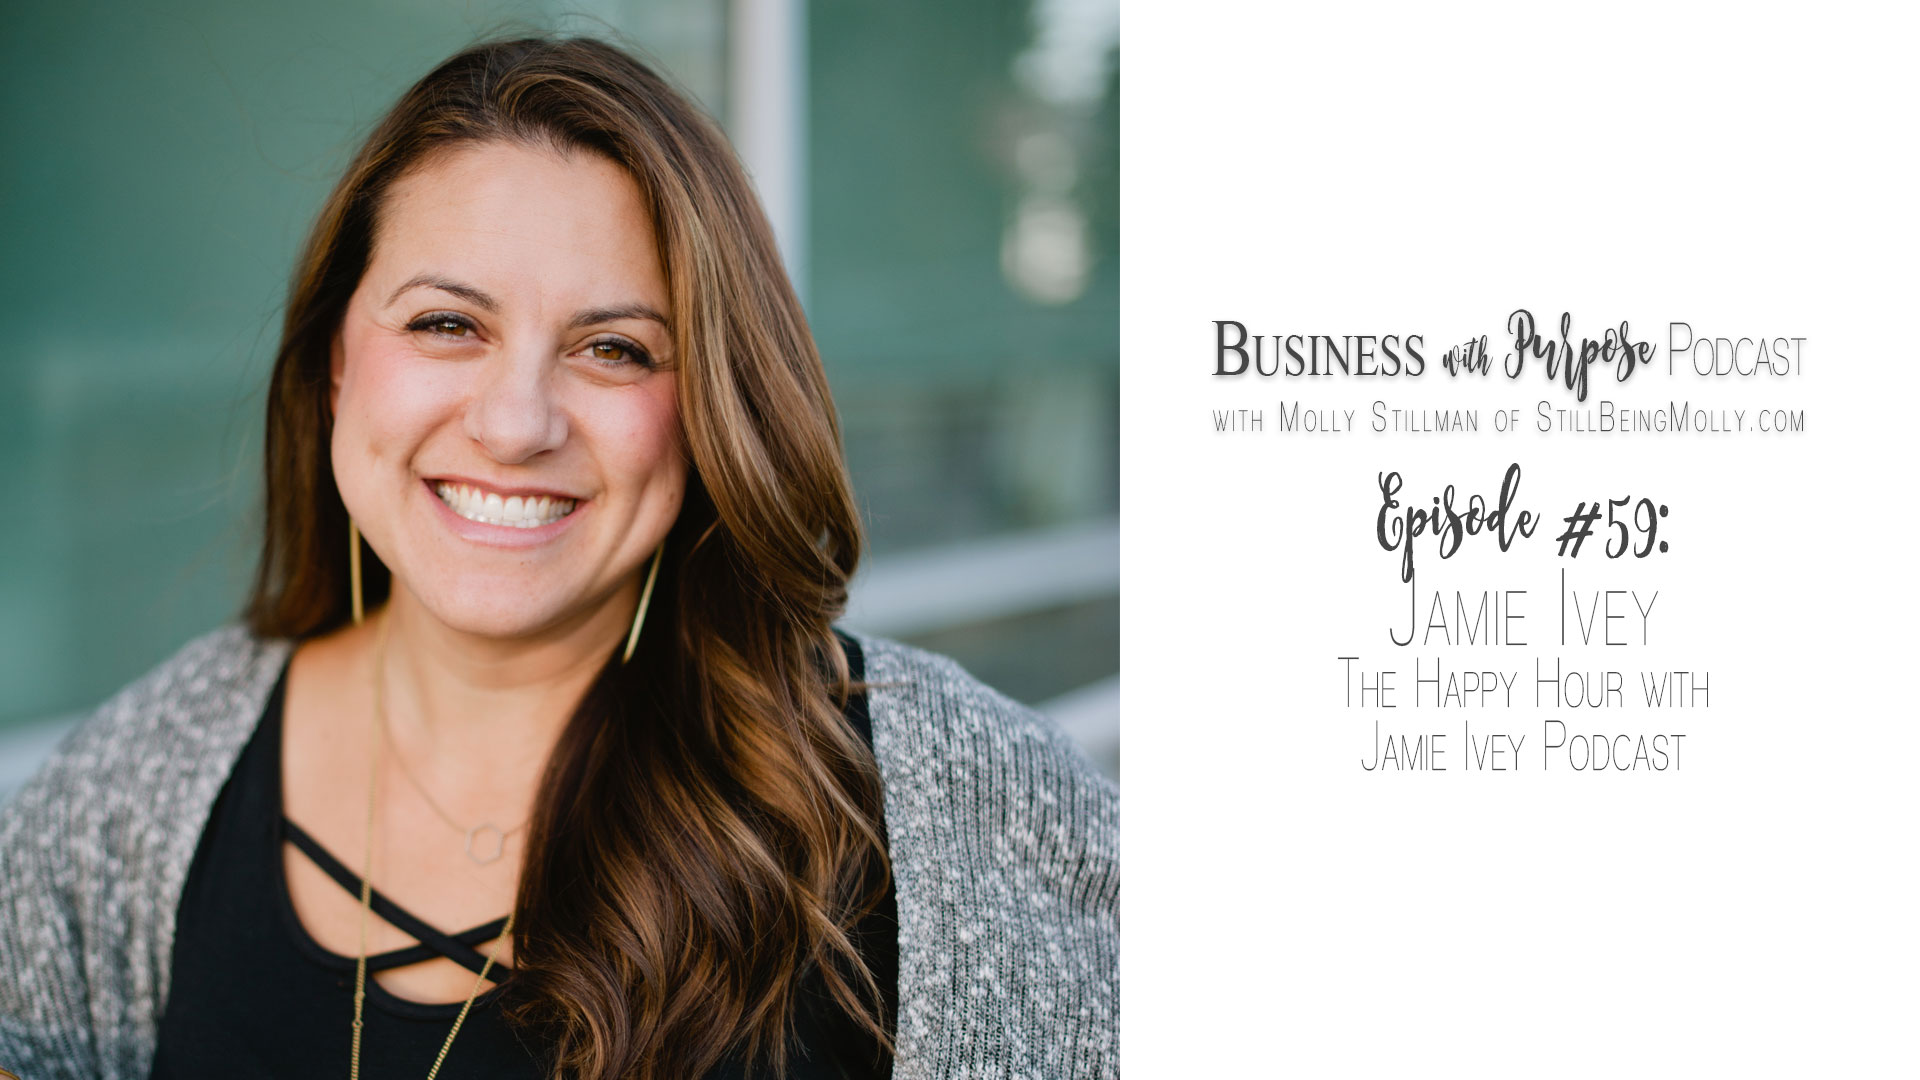 Business with Purpose Podcast EP 59: Jamie Ivey, The Happy Hour with Jamie Ivey Podcast by popular North Carolina blogger Still Being Molly